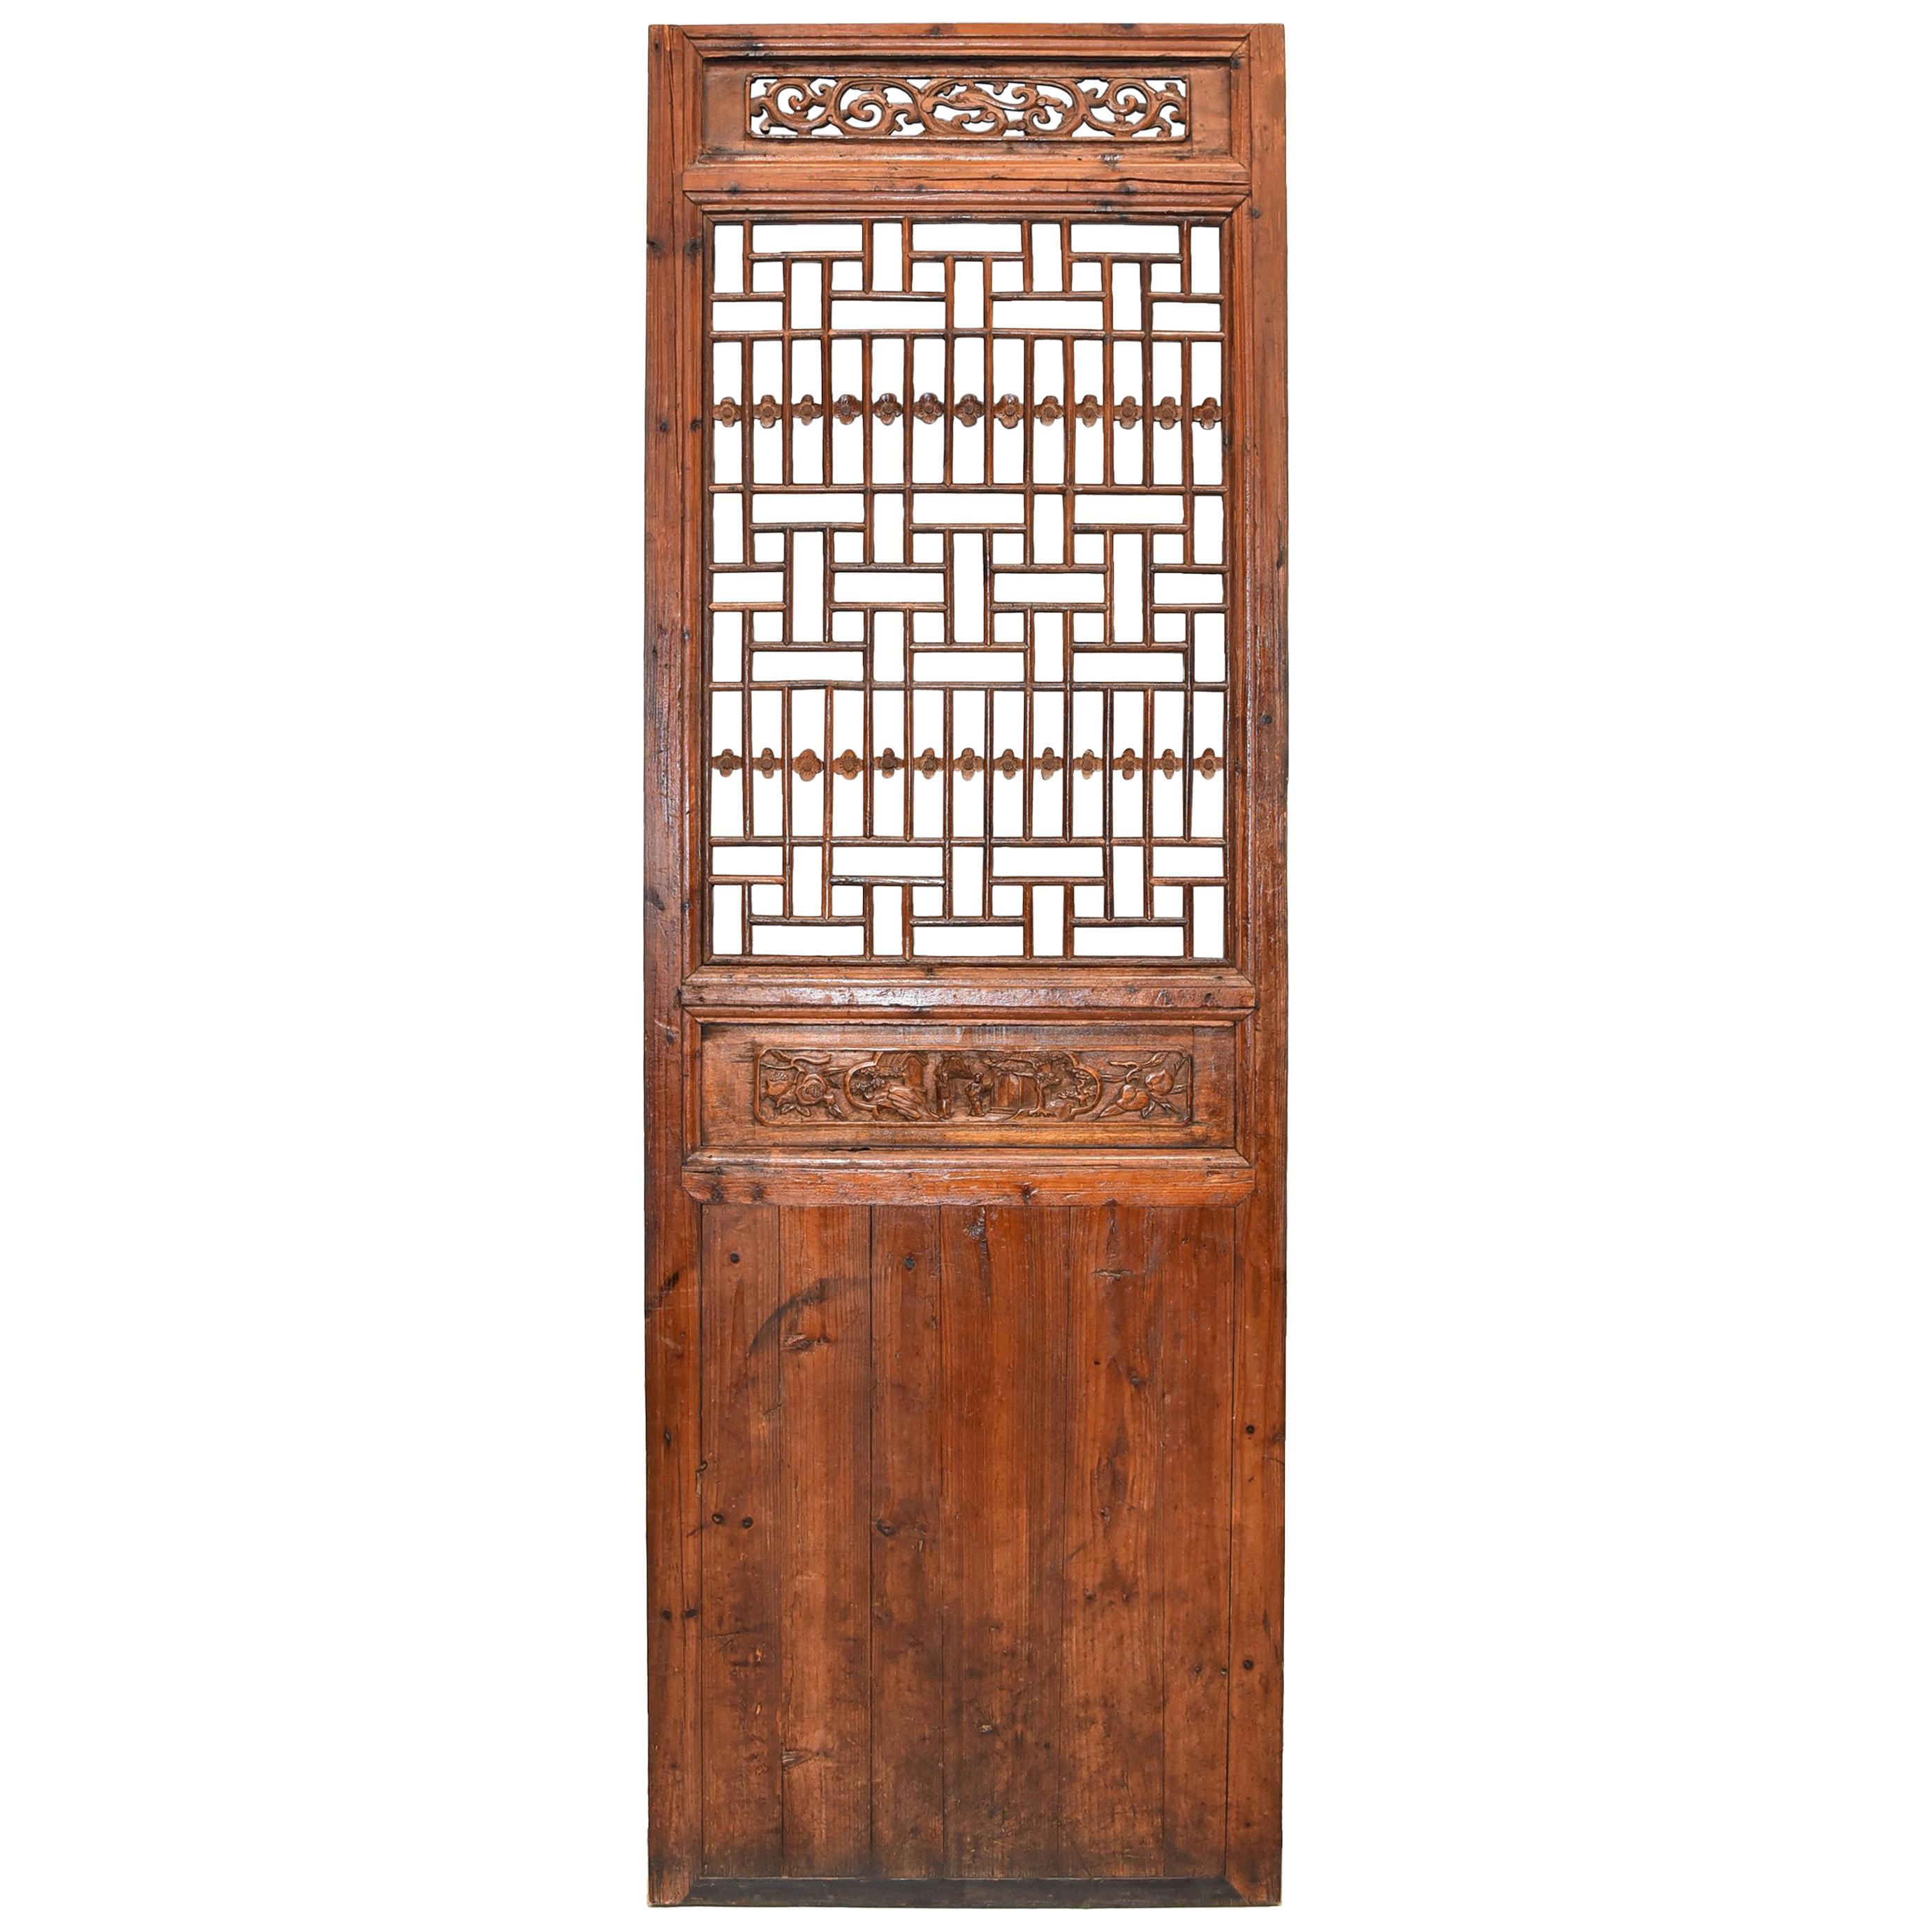 Antique Chinese Lattice Screen with Carved Plum Blossom and Dragon